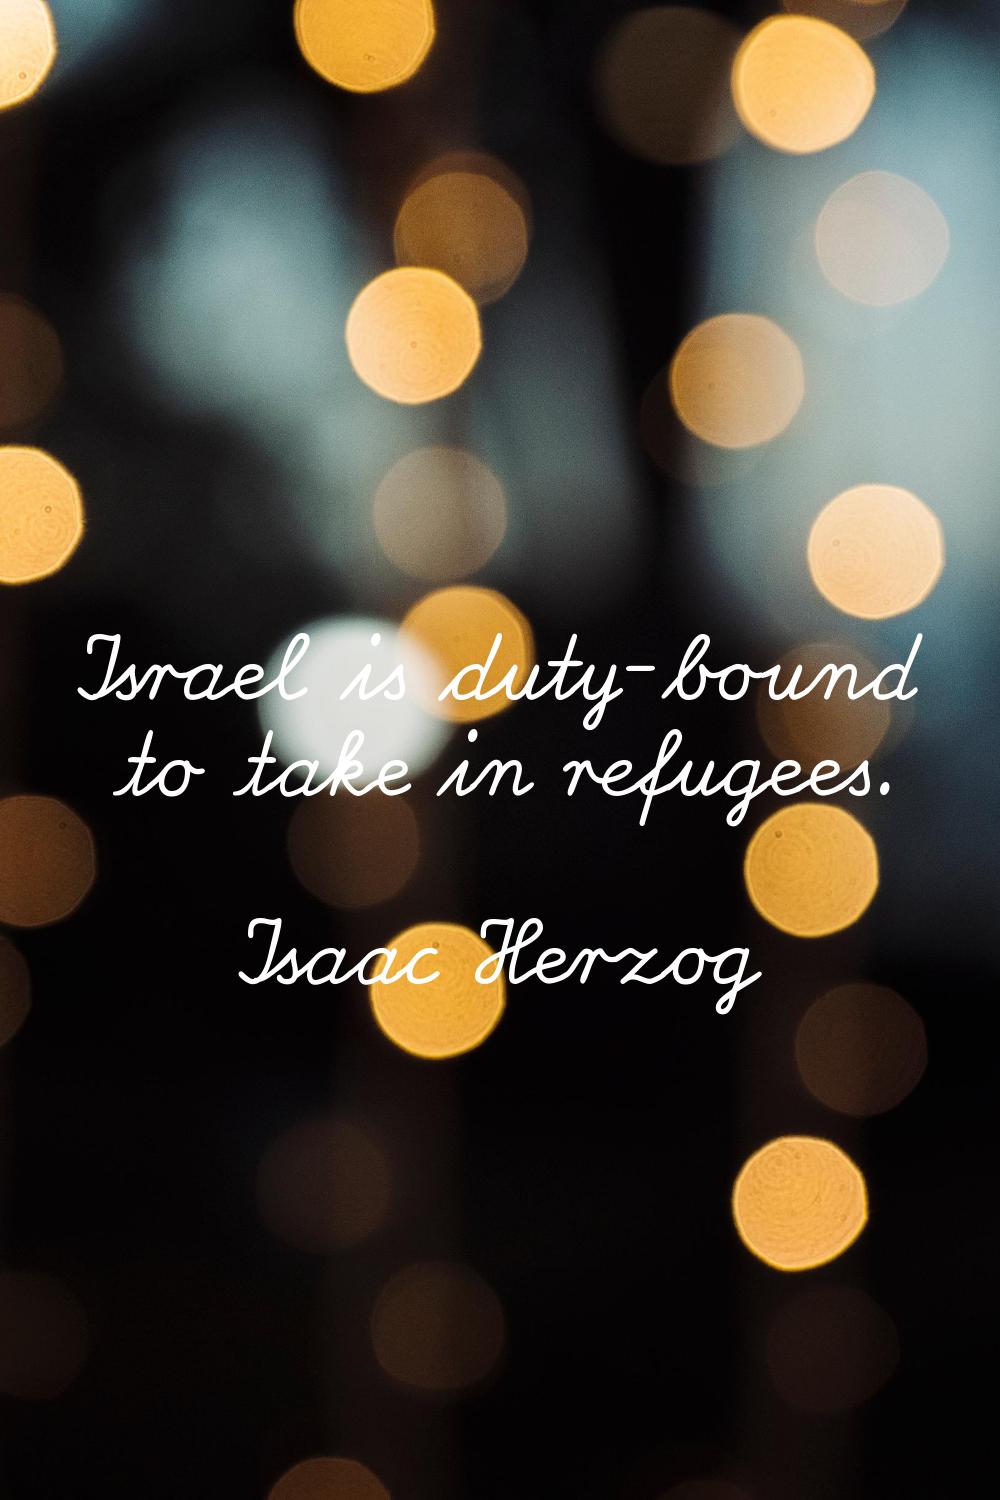 Israel is duty-bound to take in refugees.